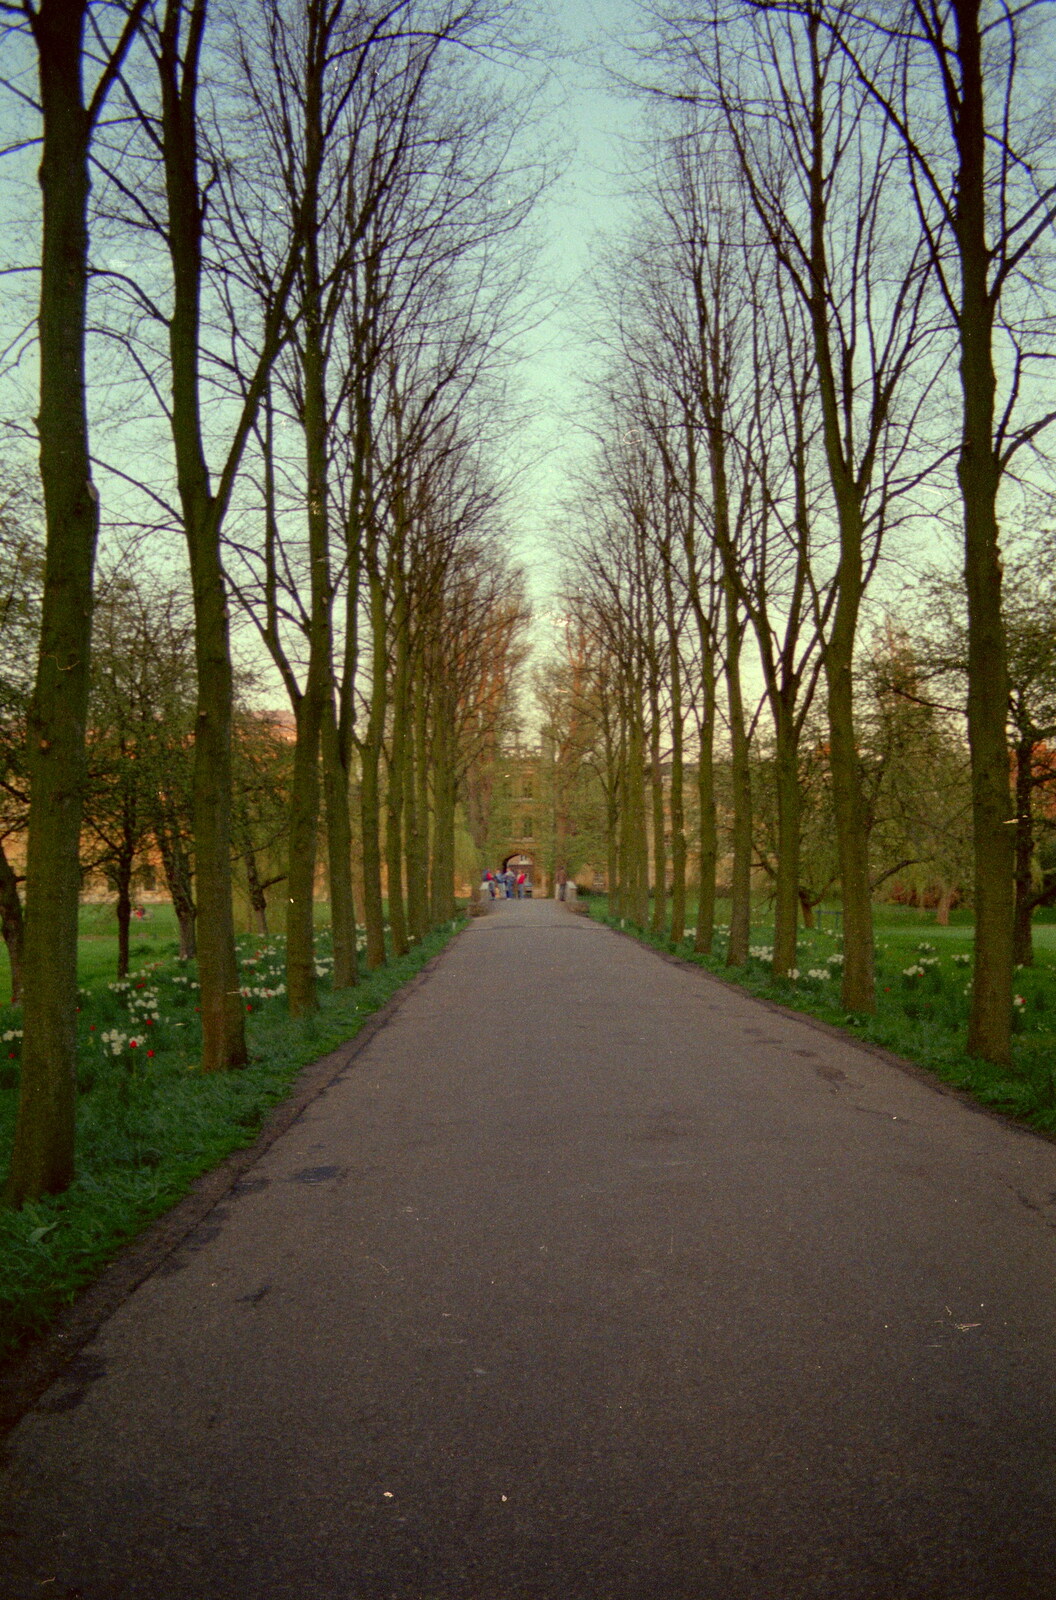 The tree-lined avenue leading to Queen's Road from A Trip to Trinity College, Cambridge - 23rd March 1986